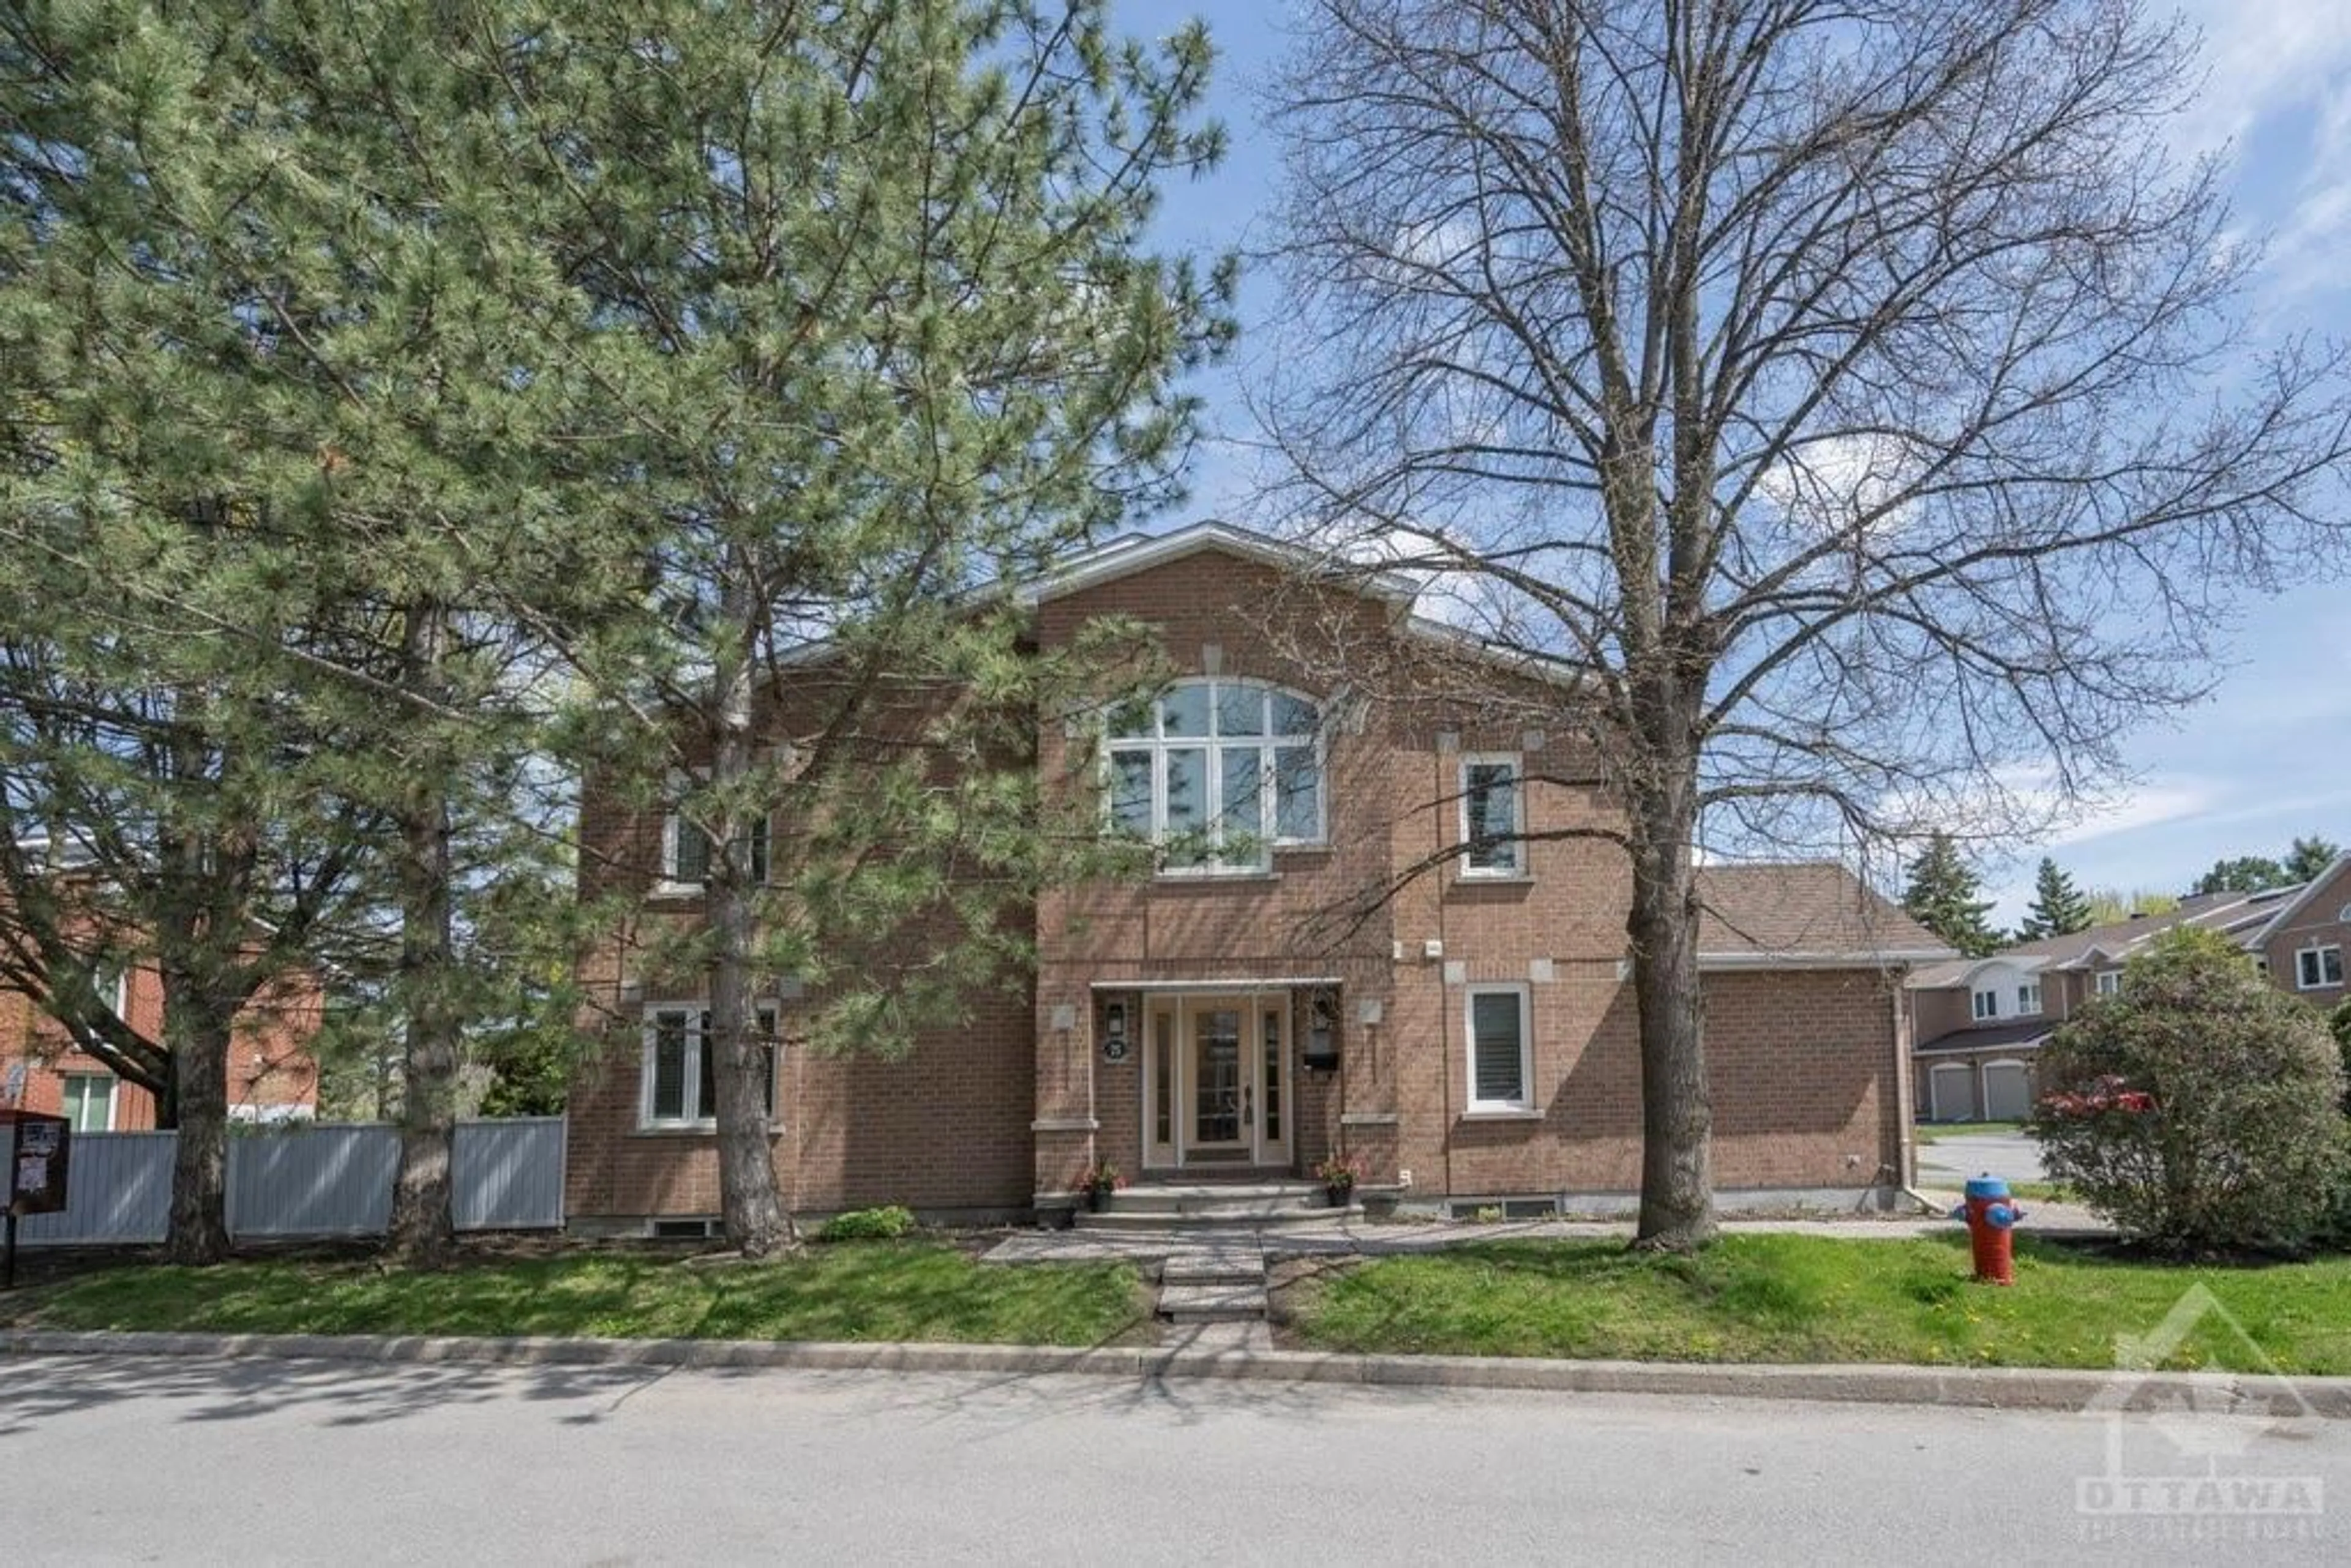 Home with brick exterior material for 25 GRANDCOURT Dr, Ottawa Ontario K2G 5X1